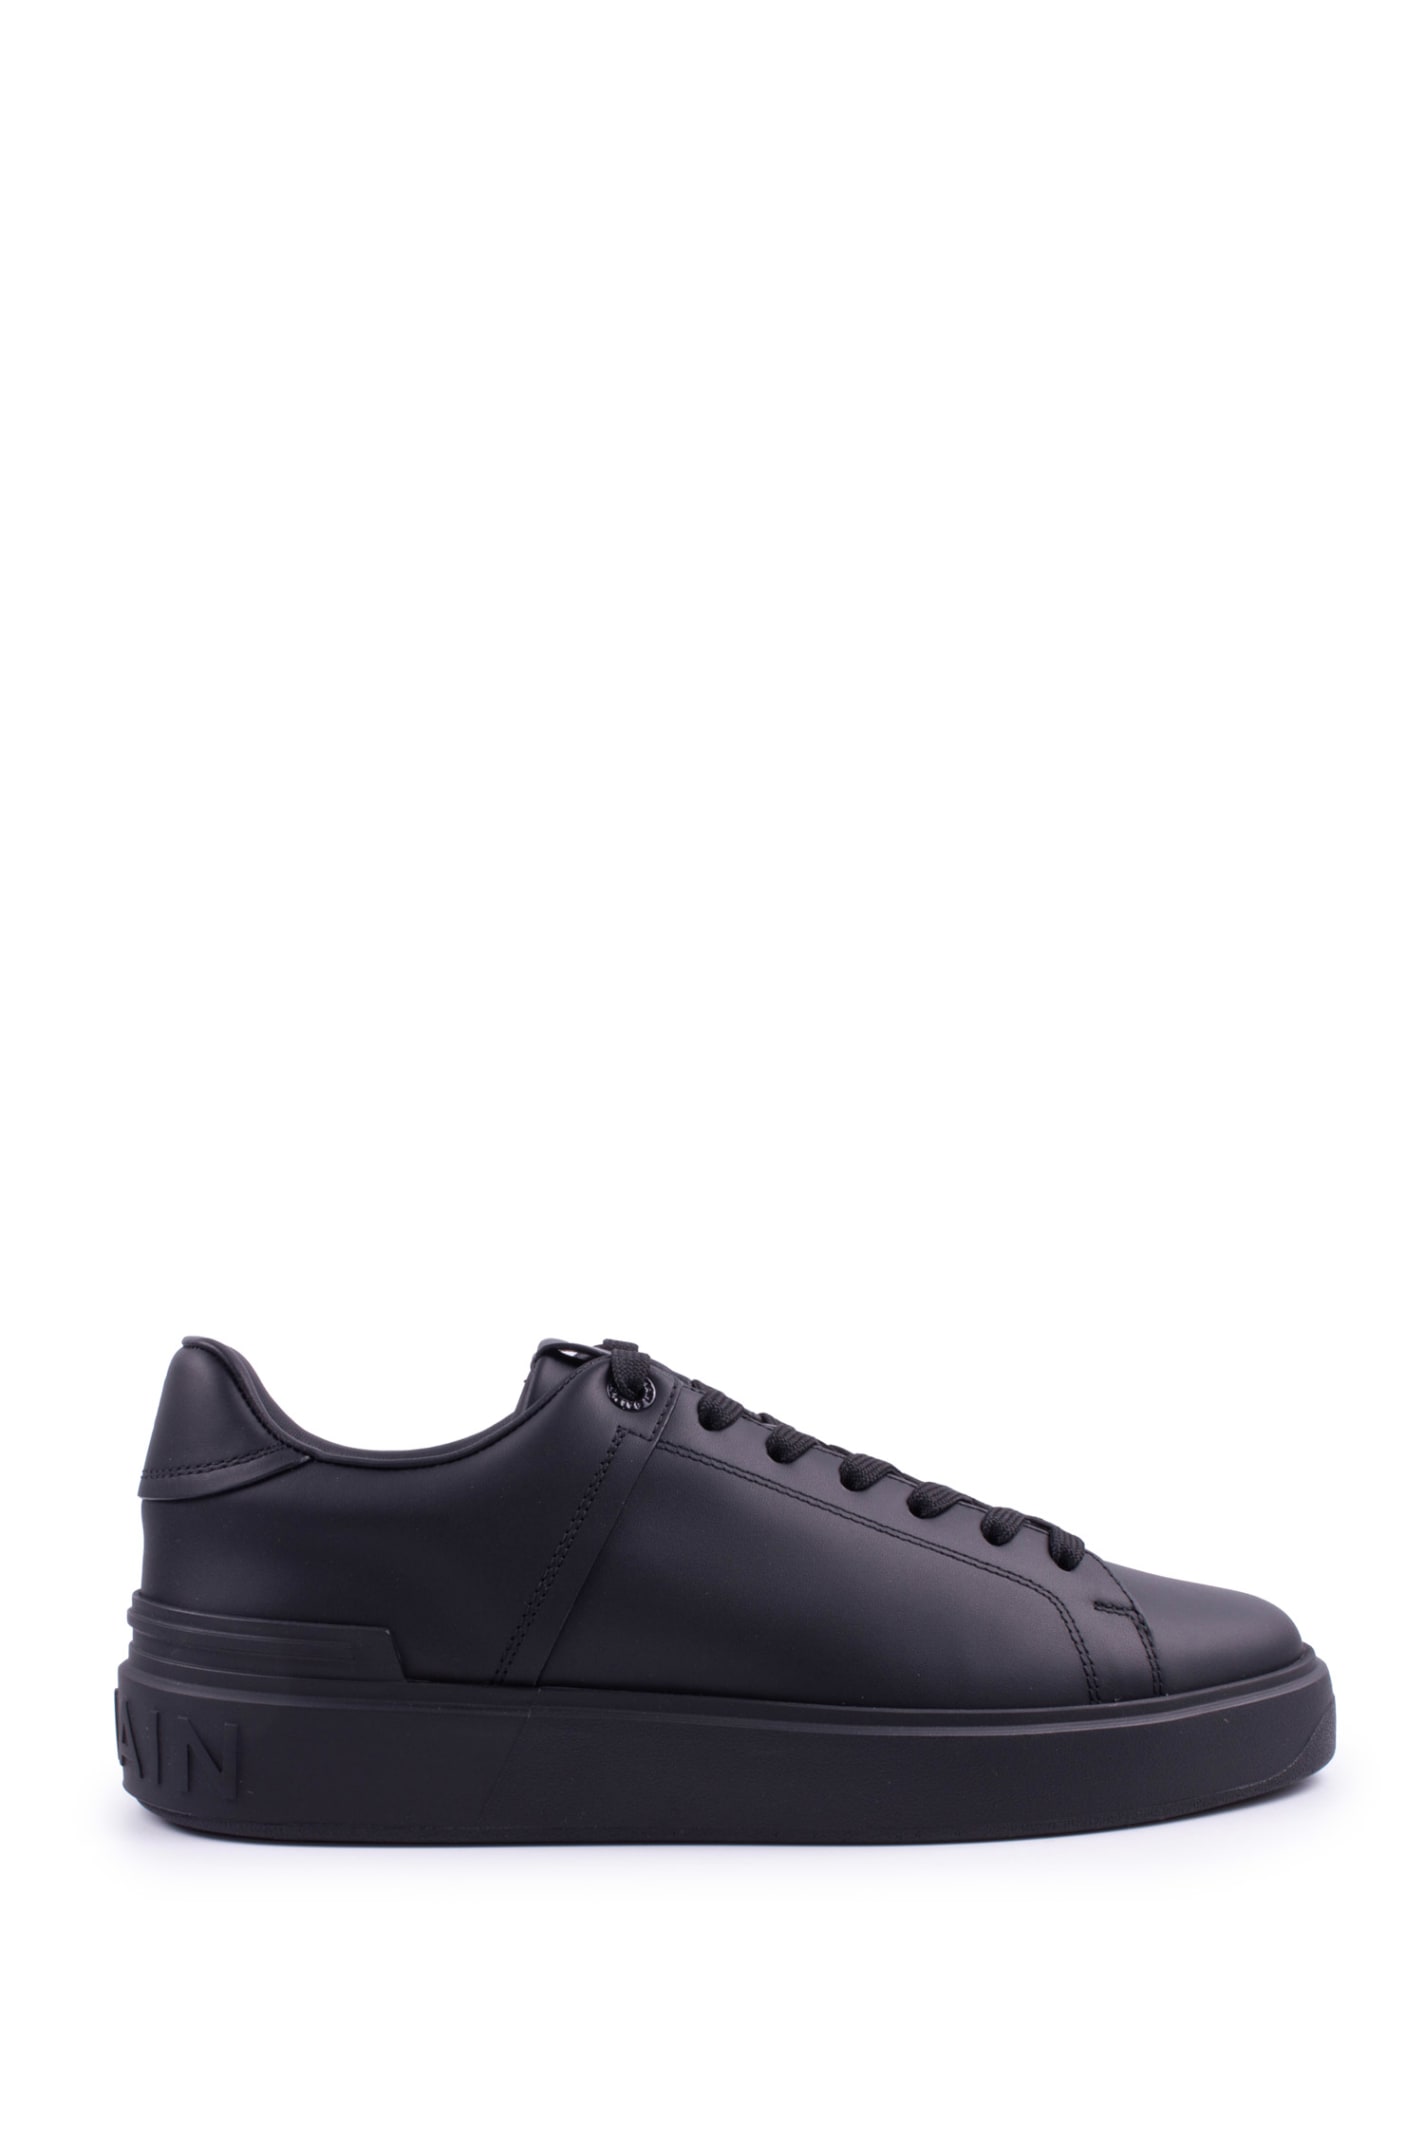 Balmain Smooth Black Leather B-court Sneakers